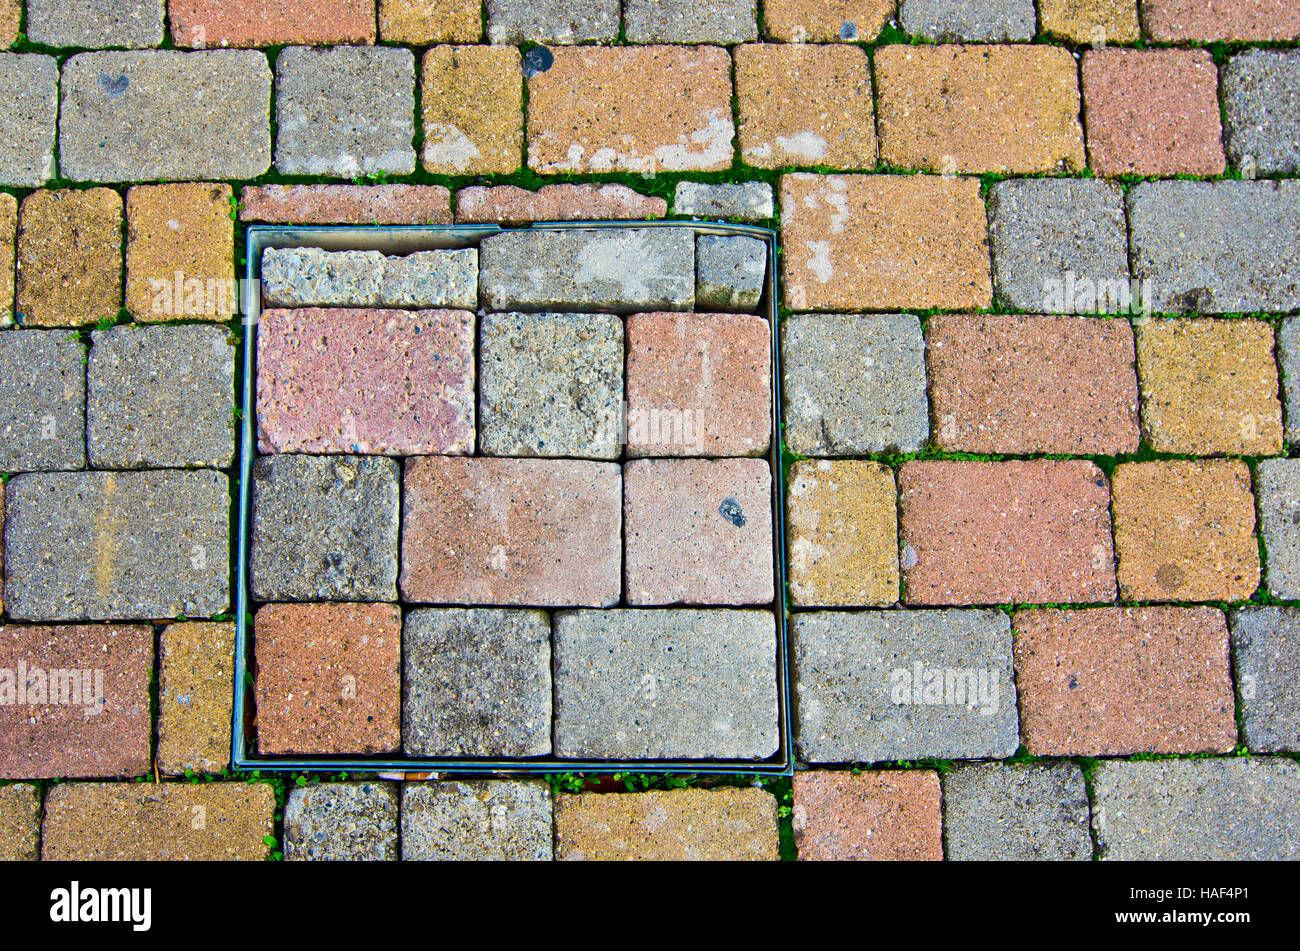 paving pattern stone blocks with shape and color irregular with manhole Stock Photo